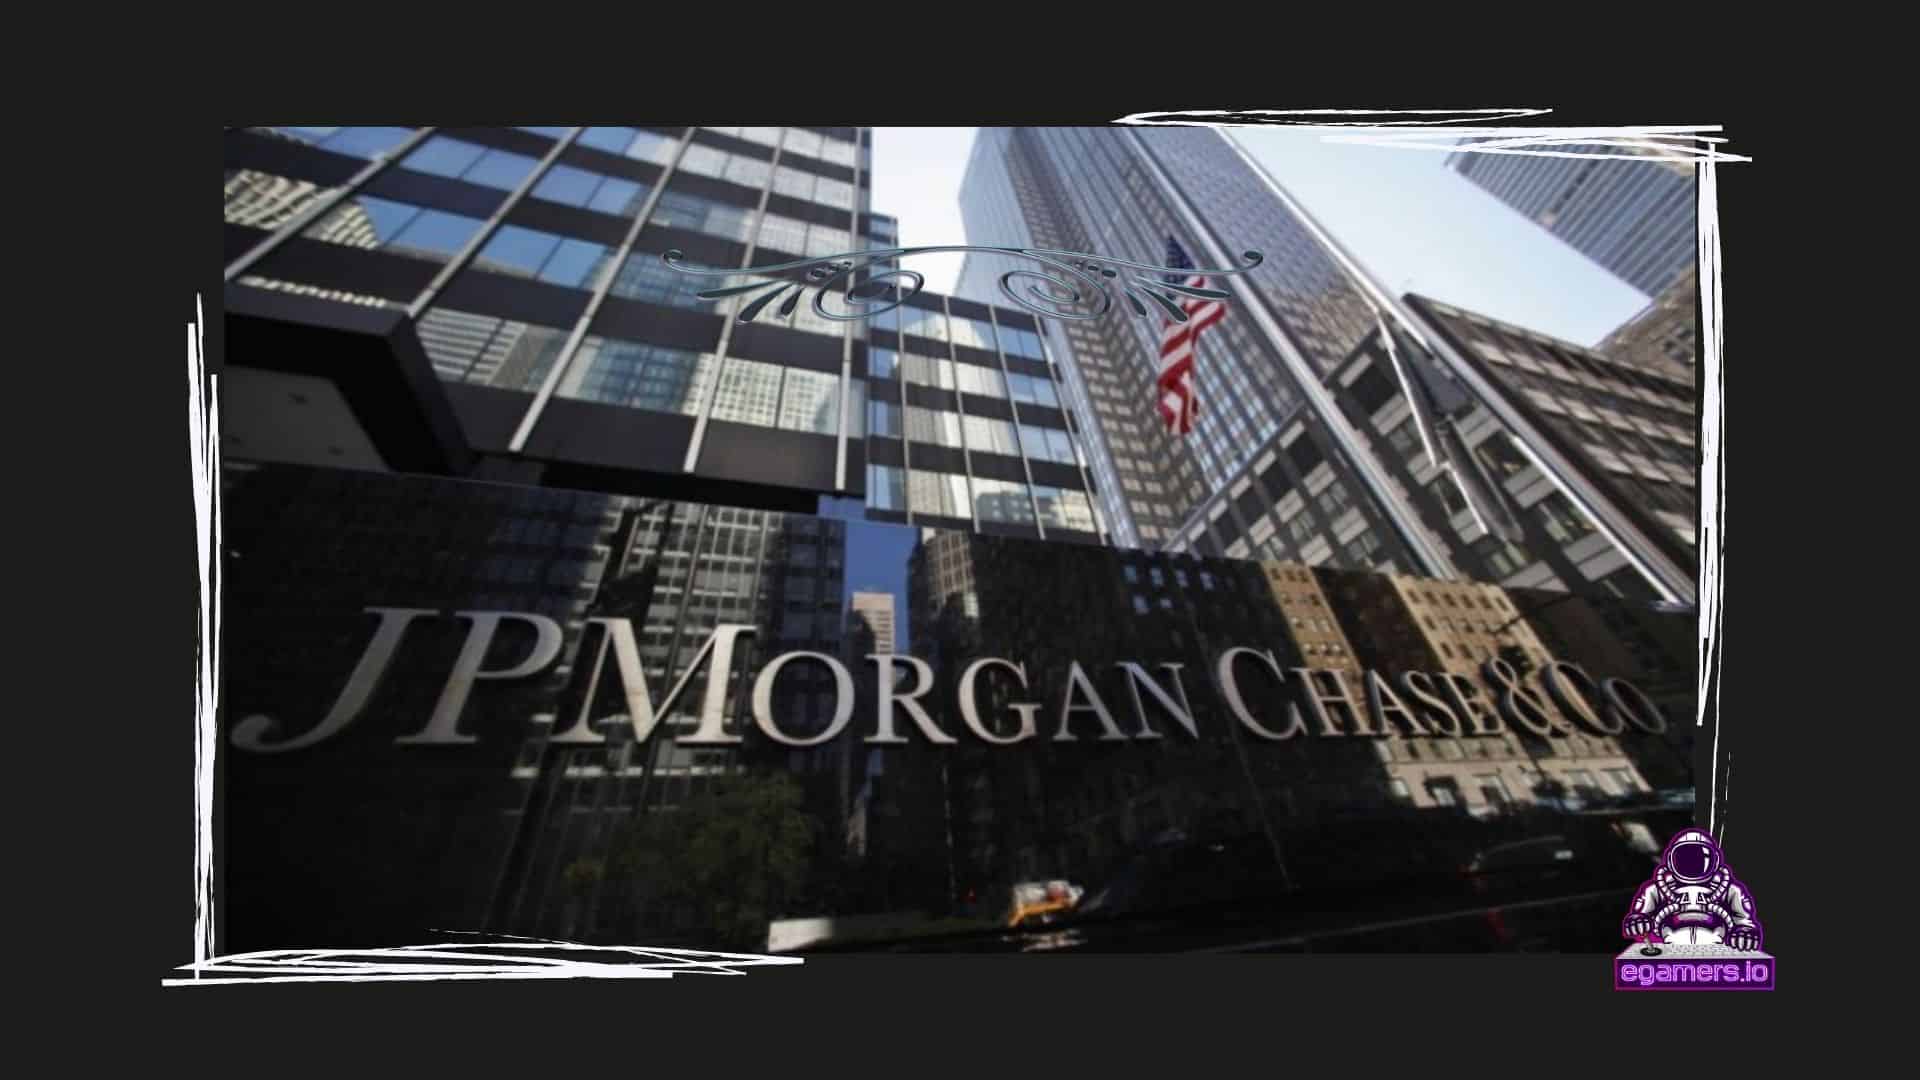 The Biggest Bank In The USA JPMorgan Joins The Metaverse